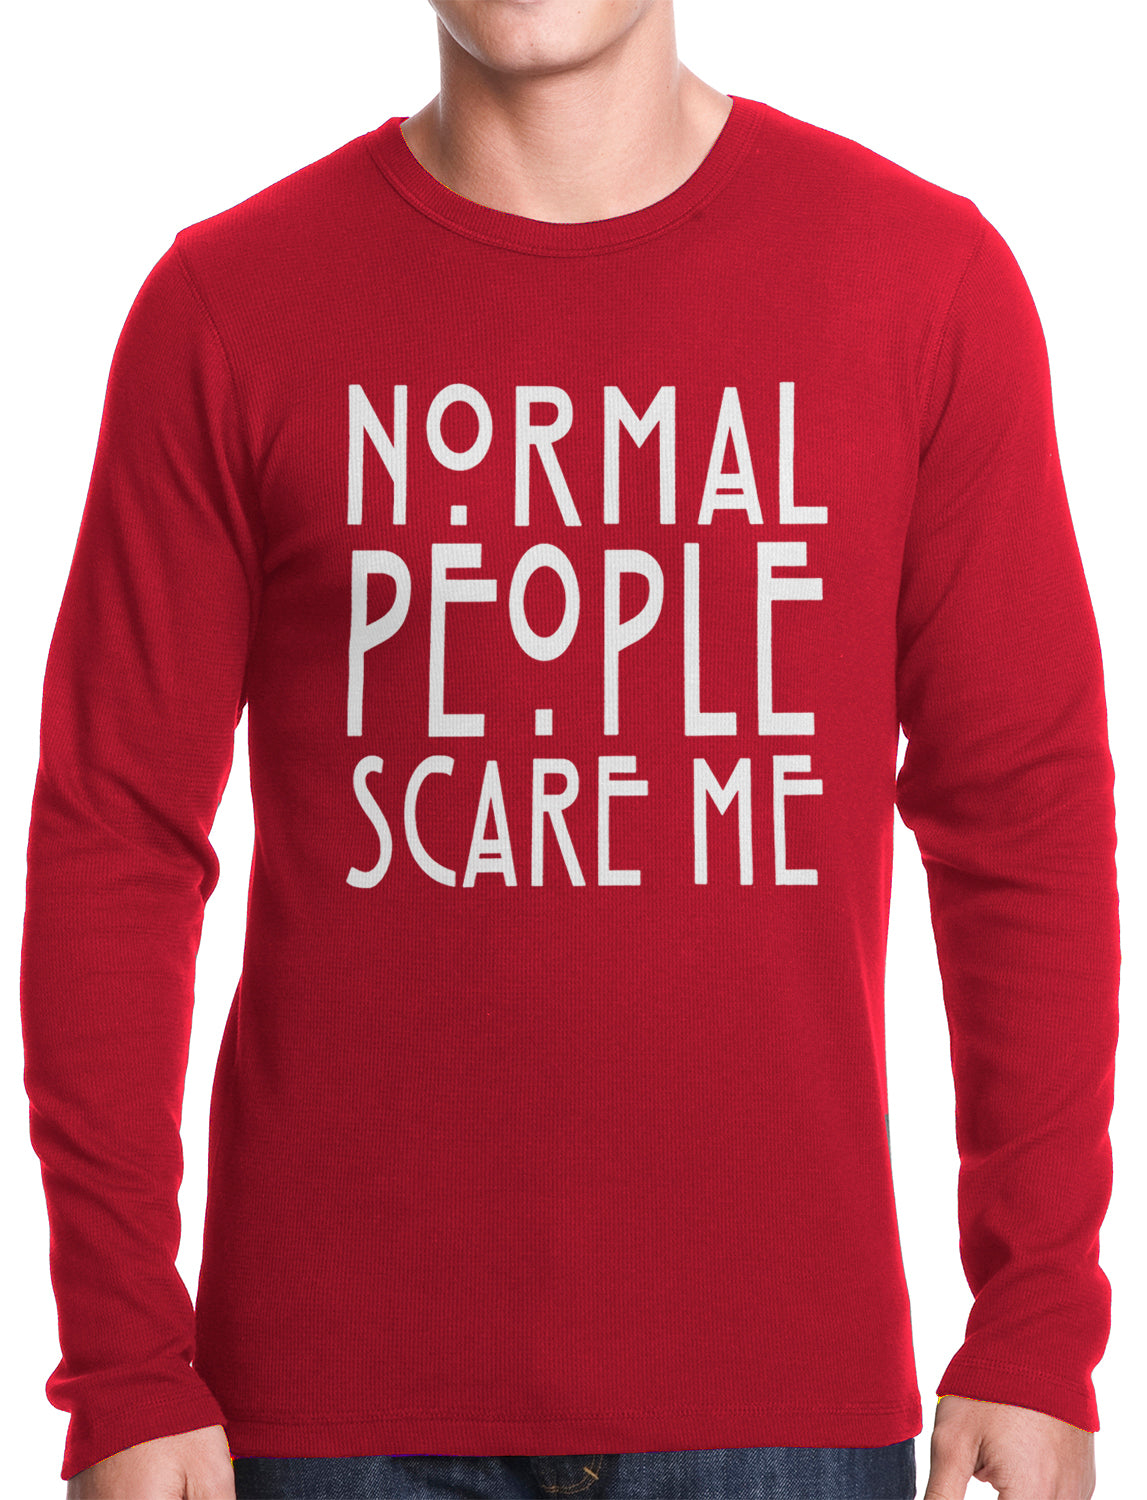 Normal People Scare Me Thermal Shirt